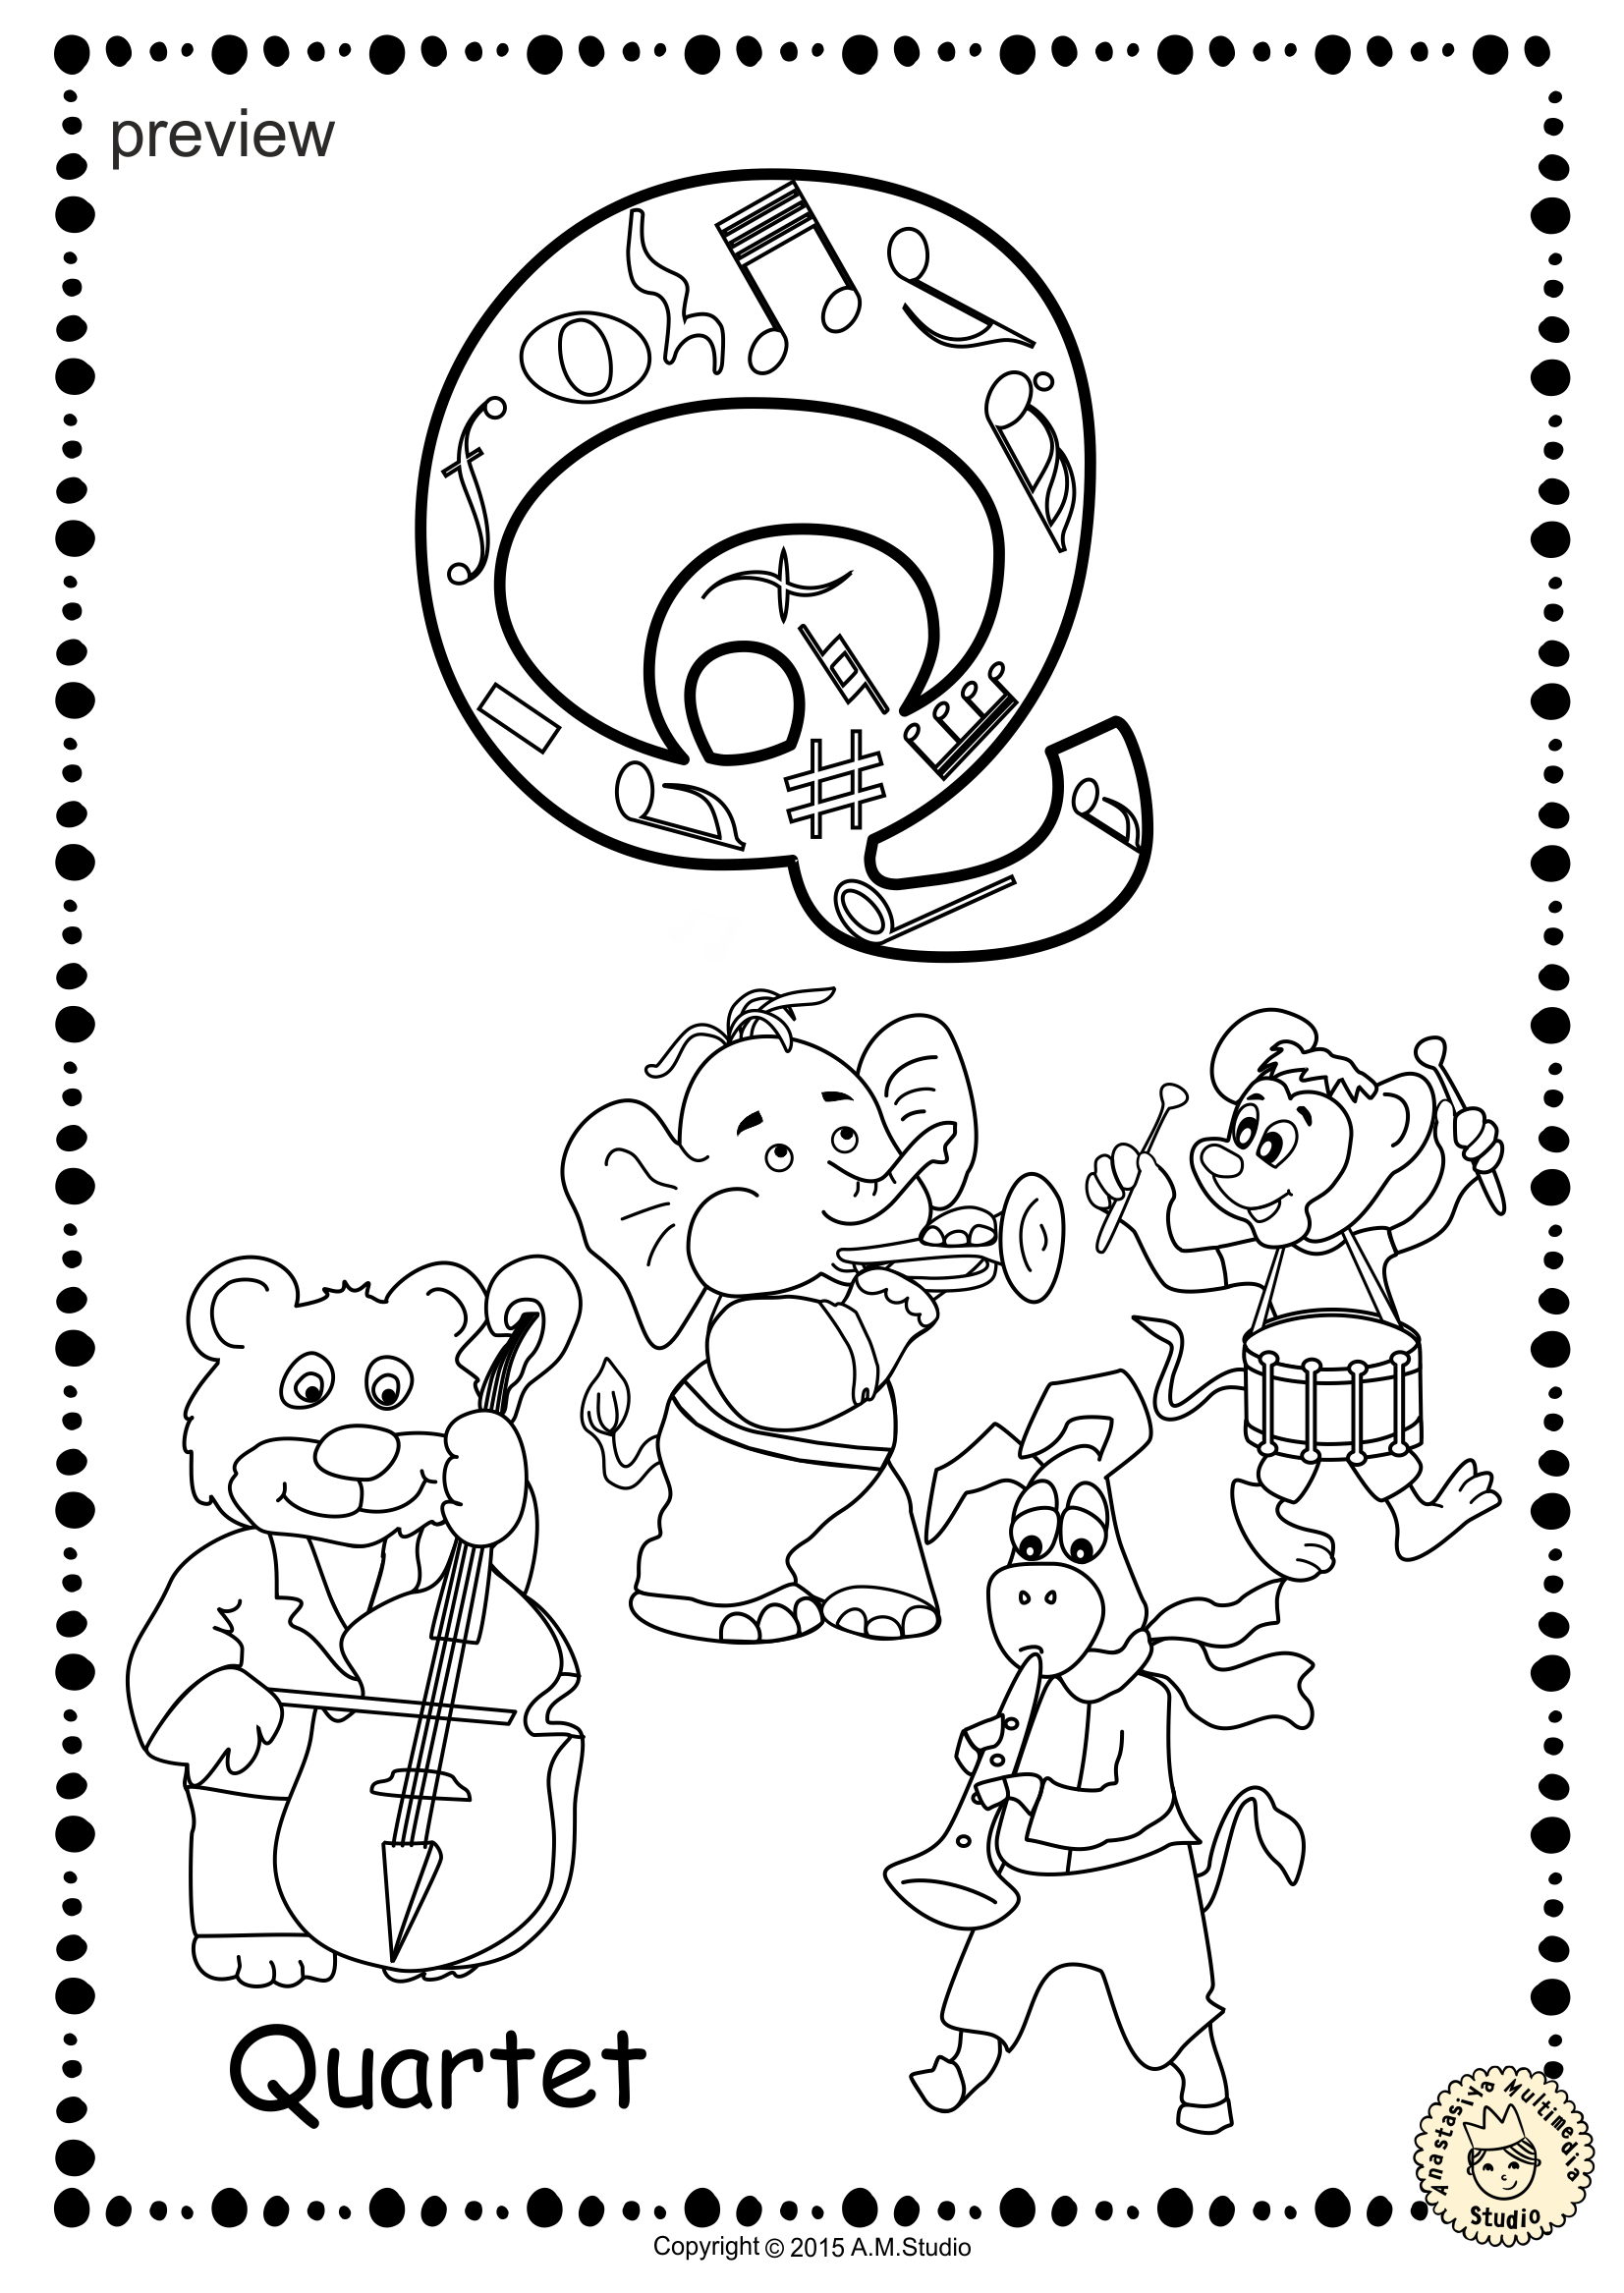 Music Alphabet Coloring pages (img # 2)